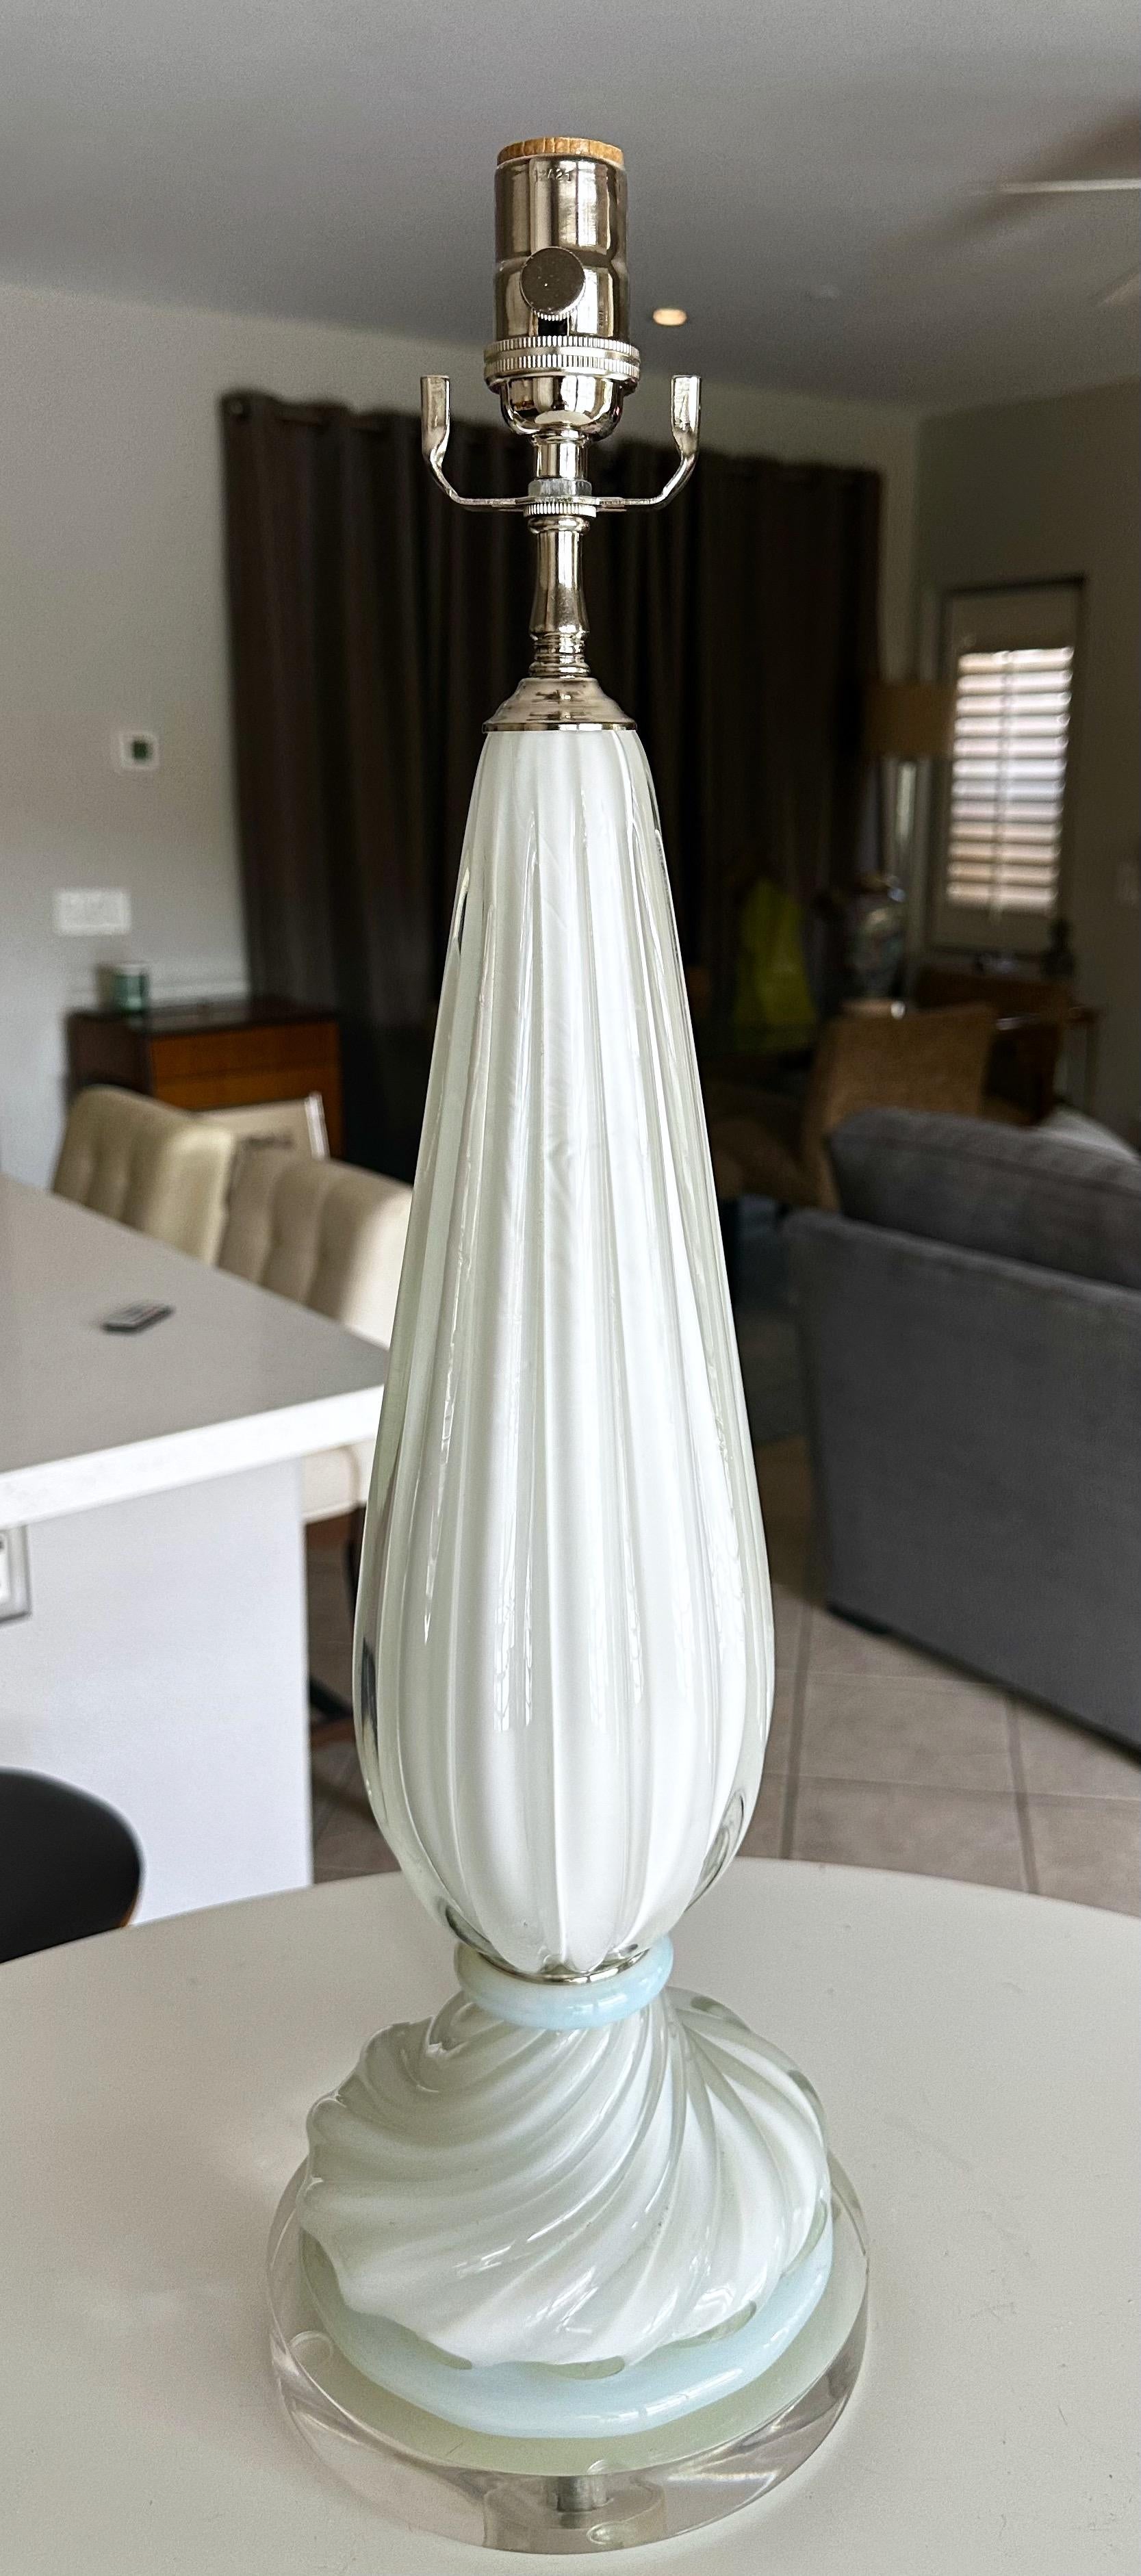 Two tone Murano Italian ribbed glass table lamp, color of the bottom base is light blue opalescence and the top glass portion white cased. Lamp is mounted on an acrylic base. Newly wired for US with new nickel fittings including 3 way socket and